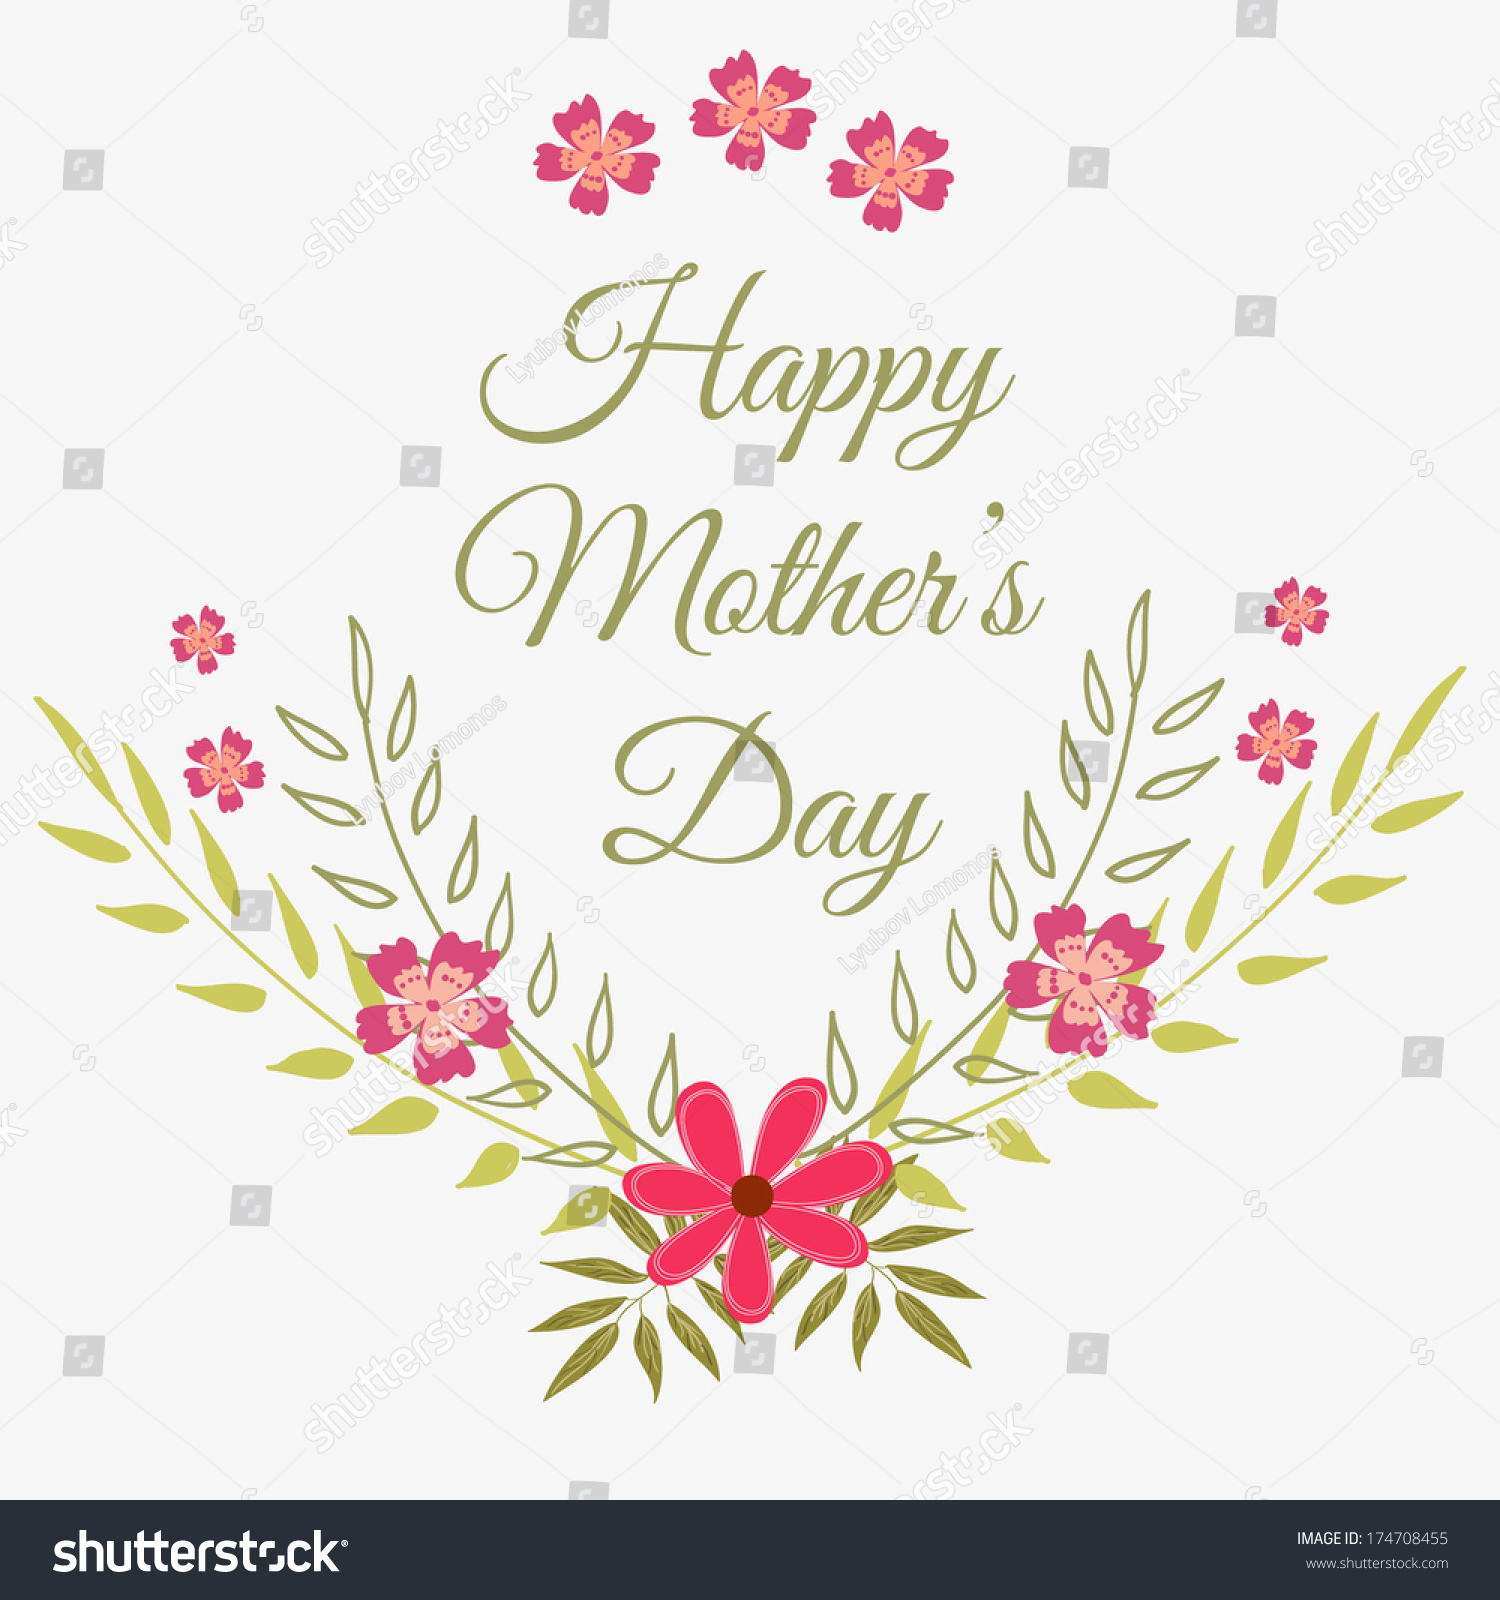 Download Happy Mothers Day Card Design Vector Stock Vector ...